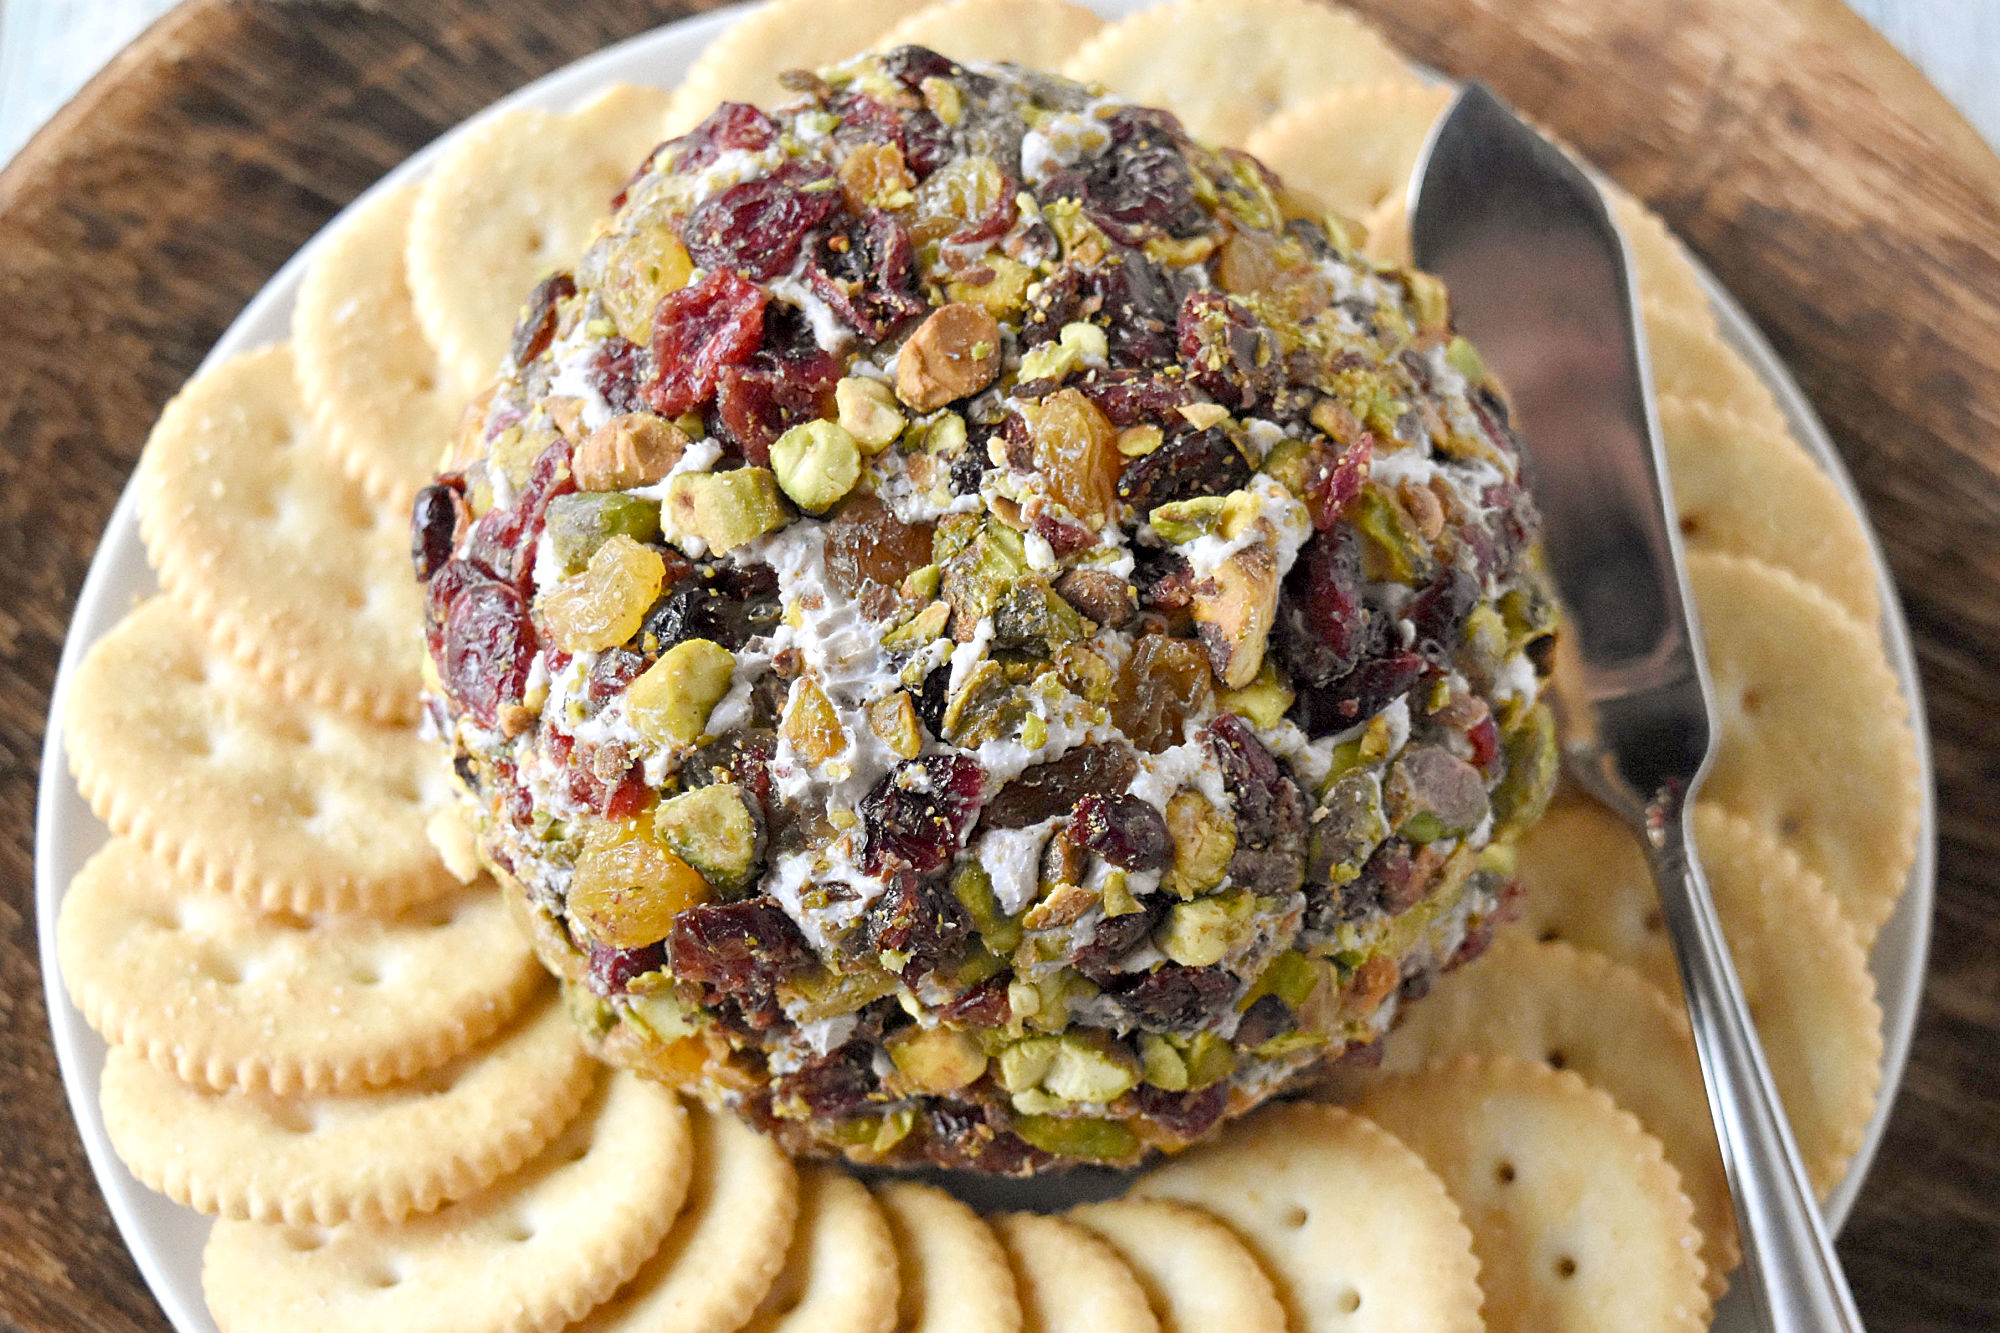 Blue Cheese Cranberry Ball is packed with creamy blue cheese, roasted cranberries, herbs, and spices.  It takes just a few minutes to whip up for any planned or unplanned dinner guests. #CranberryWeek